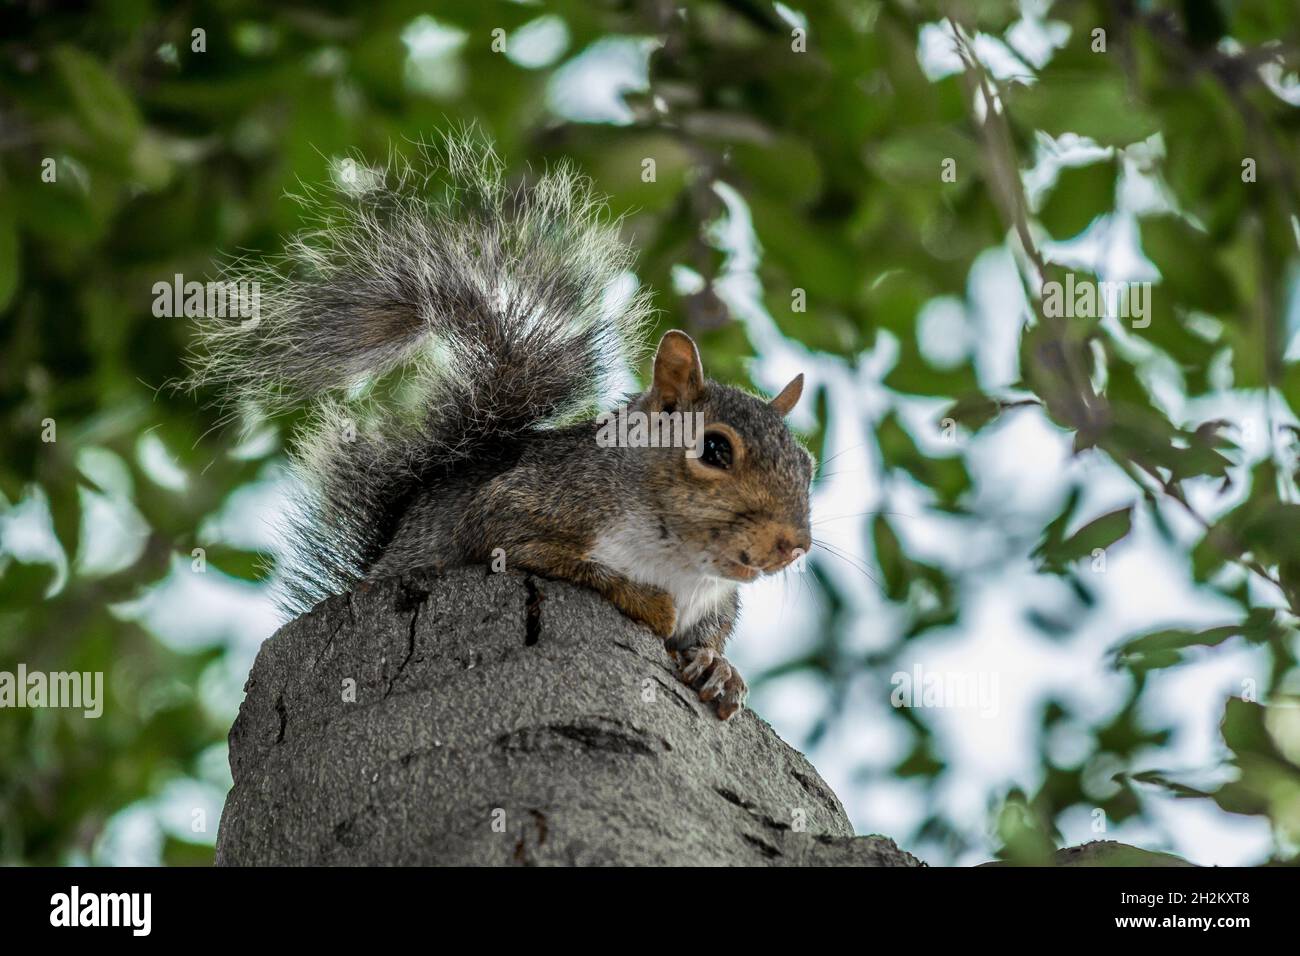 Eastern grey squirrel looking at camera, sitting on stump in California Live Oak Tree Stock Photo